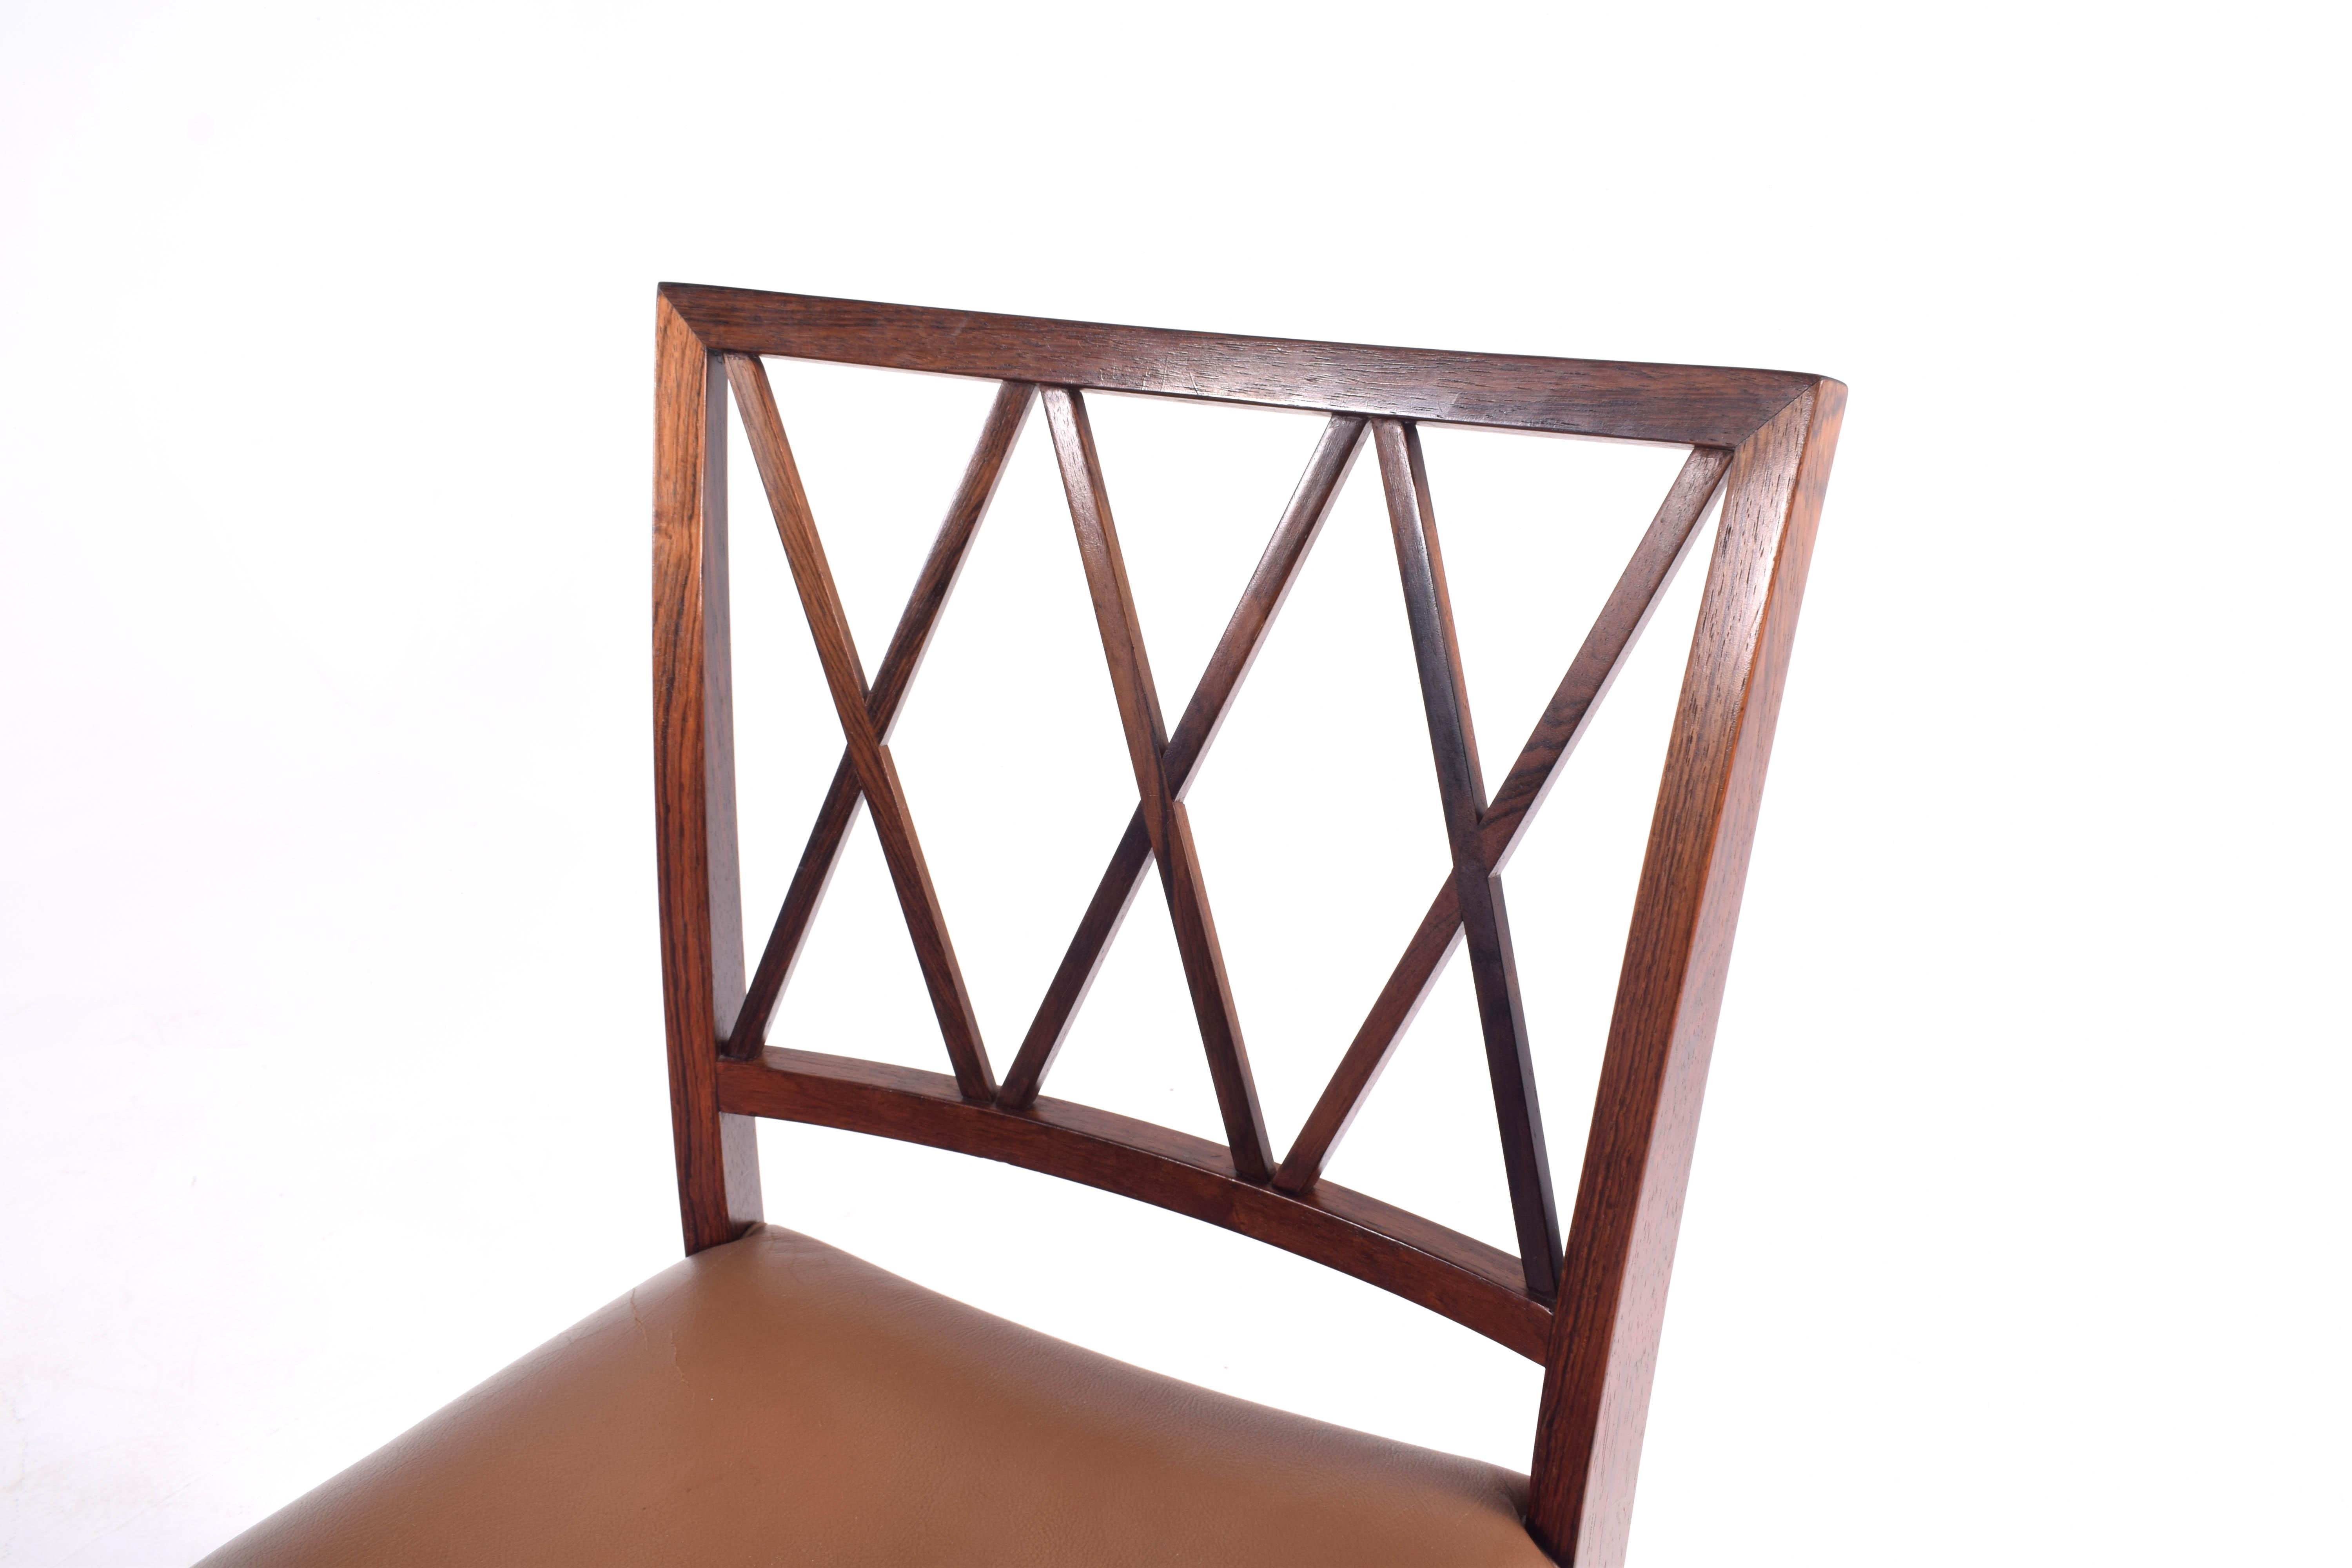 Ole Wanscher Slagelse Rosewood Dining Chairs 3